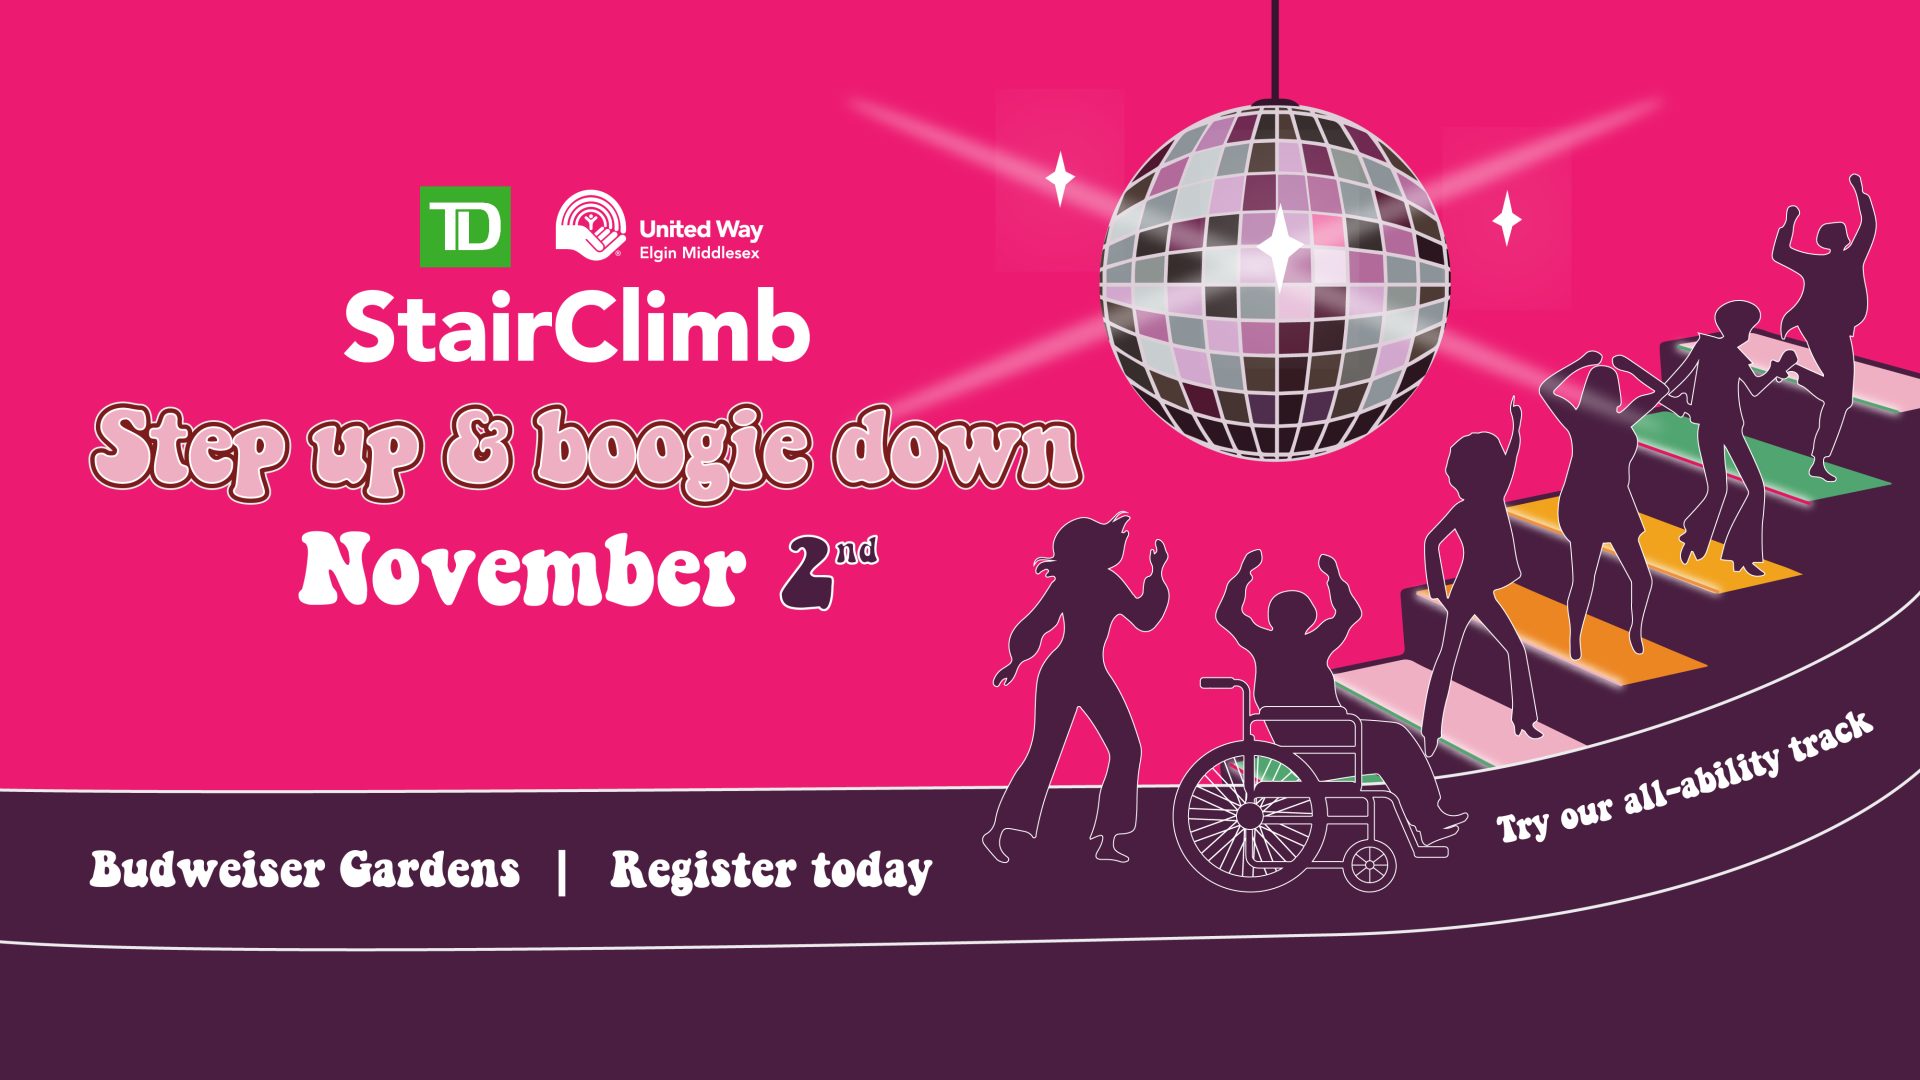 TD StairClimb for United Way, Step up & boogie down!